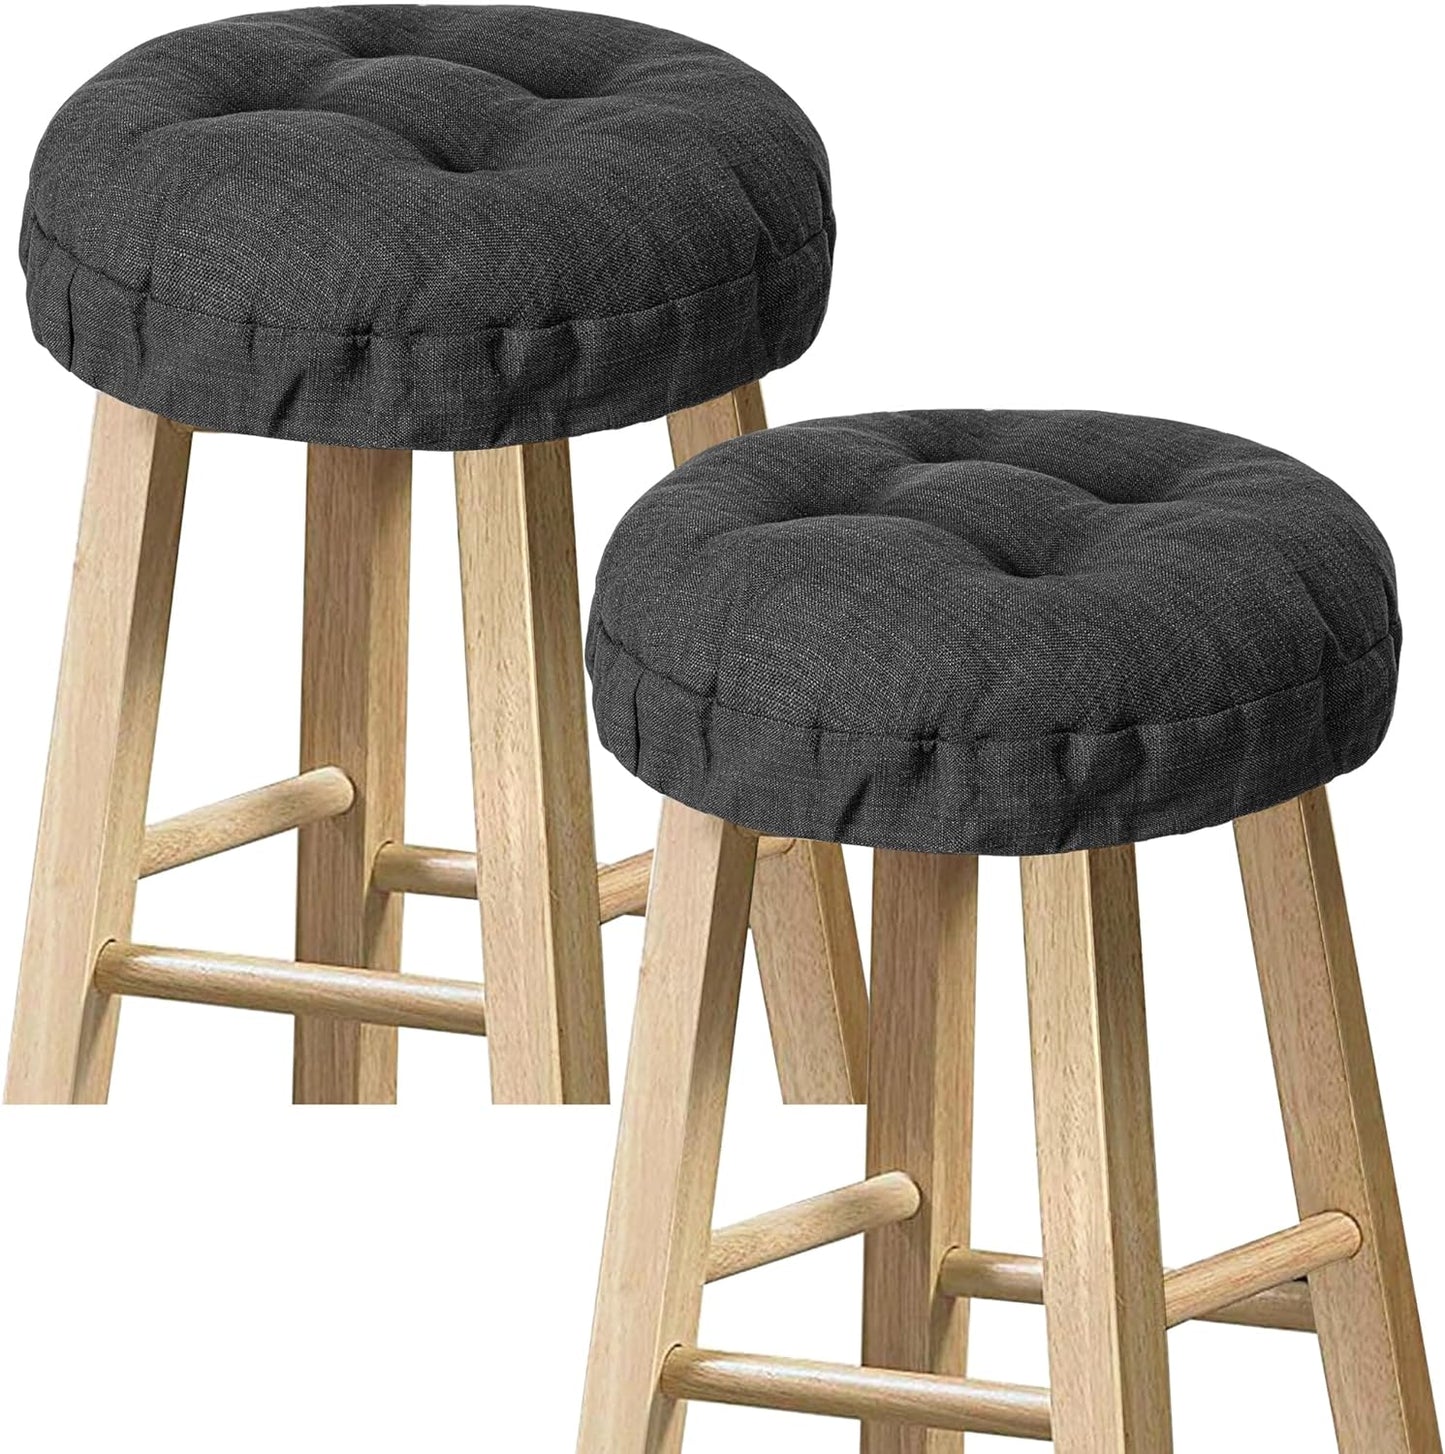 Sunlit Bar Stool Covers - Set of 2 Round Bar Stool Seat Covers, Soft and Cushioned Bar Chair Covers, Easy to Install and Wash, Cover Only, 14 Inch Diameter, Brown